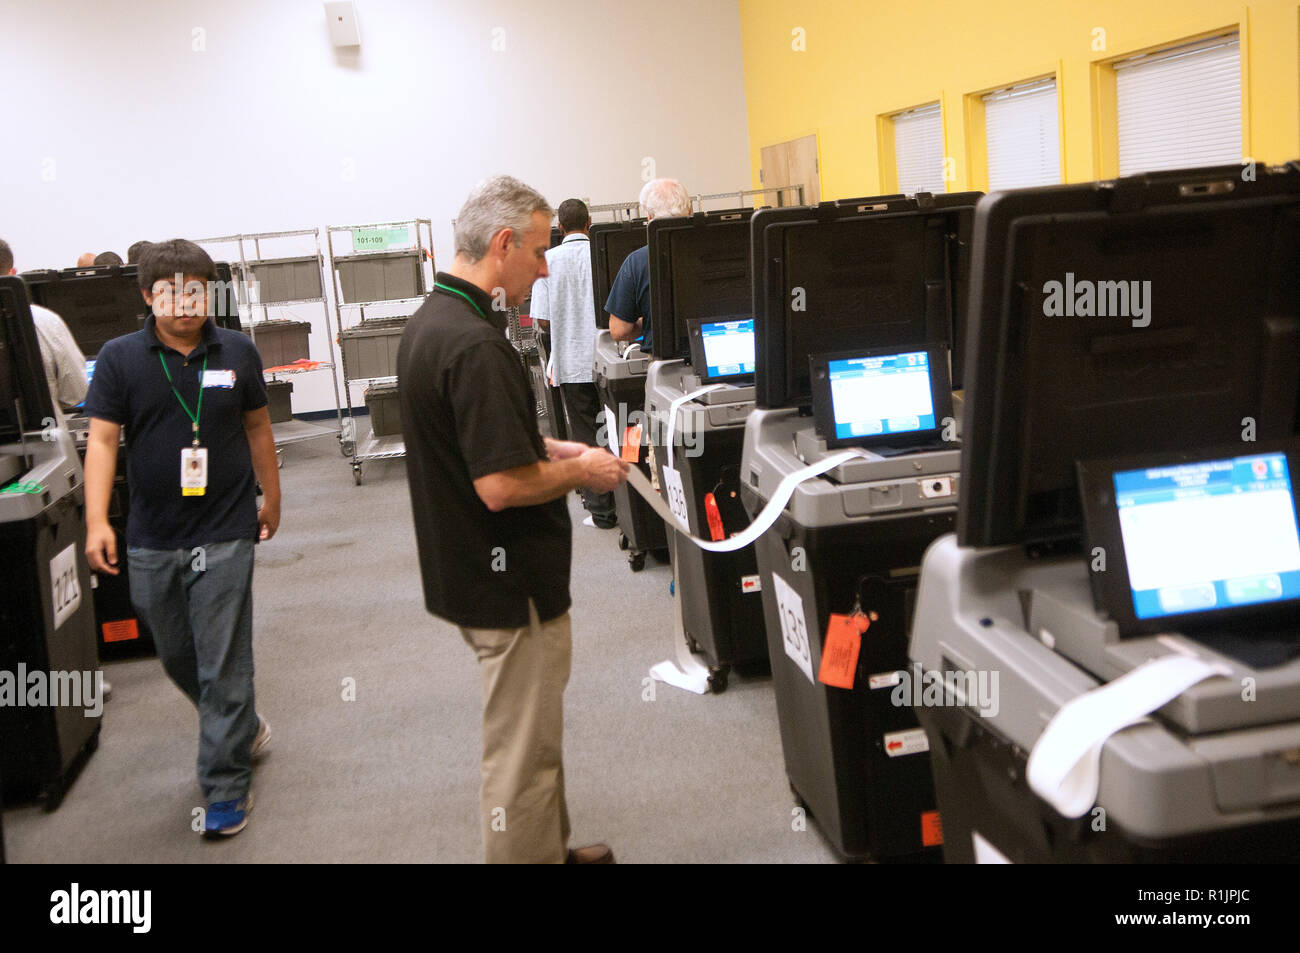 Orlando, Florida, USA. November 12, 2018 - Orlando, Florida, United States - Election workers scan ballots as a recount begins on November 12, 2018 at the Orange County Supervisor of Elections Office in Orlando, Florida. A statewide vote recount is being conducted to determine the winners of the races for governor, U.S. senate, and agriculture commissioner. (Paul Hennessy/Alamy) Credit: Paul Hennessy/Alamy Live News Stock Photo